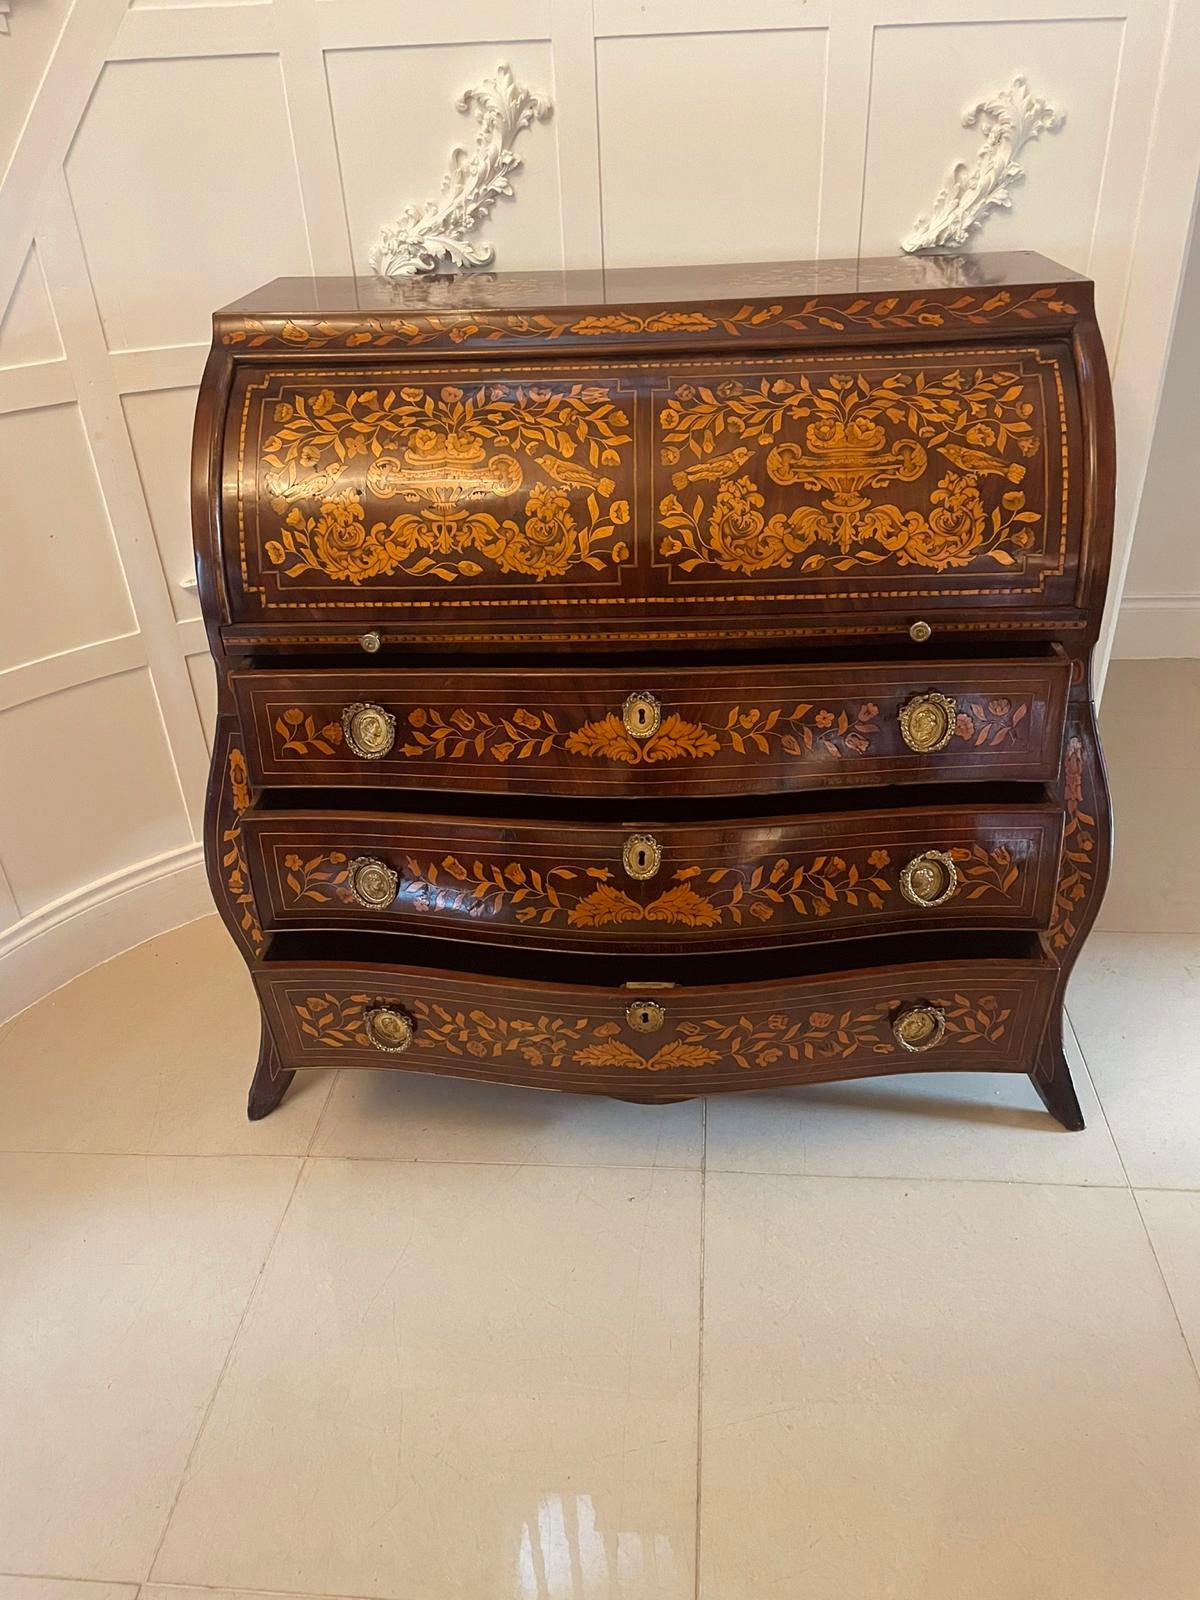 Inlay Antique 18th Century Quality Mahogany Floral Marquetry Inlaid Cylinder Bureau For Sale